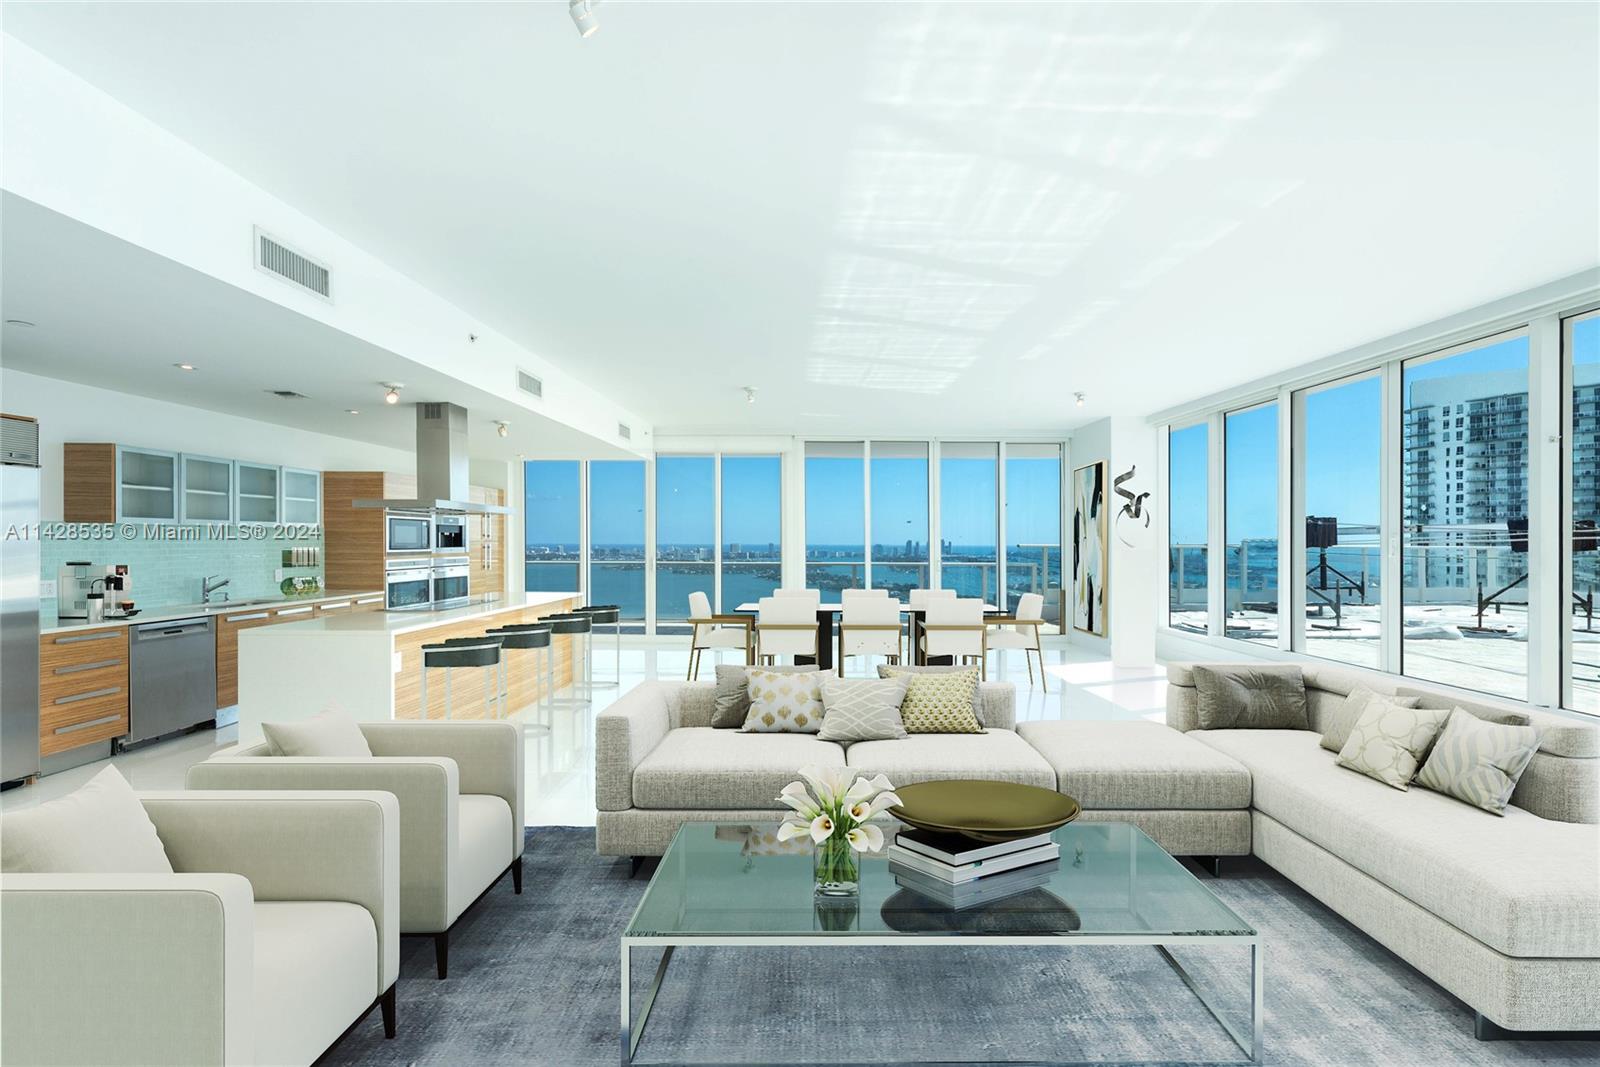 Rarely available, modern Penthouse in Paramount Bay Edgewater, with a private, 2,000-sf terrace offering incredible views of Biscayne Bay, Downtown Miami skyline, and western sunset views. This immense, 5-bedroom 5.5-bath luxe residence features floor-to-ceiling glass walls that allow maximum exposure of panoramic water and city views throughout all living spaces, open concept gourmet kitchen, oversized bedrooms with en-suite baths and walk-in closets, private elevator, and more. Live life on the water in Miami’s trendy neighborhood, Edgewater – ideally located between Miami Design District, Midtown Miami, Downtown Miami, and Miami Beach. Paramount Bay is a luxe condominium with 2 pools, 2-story 6,000-sf fitness center with spa, valet, and 24-h security. Available for sale at $4.695M.